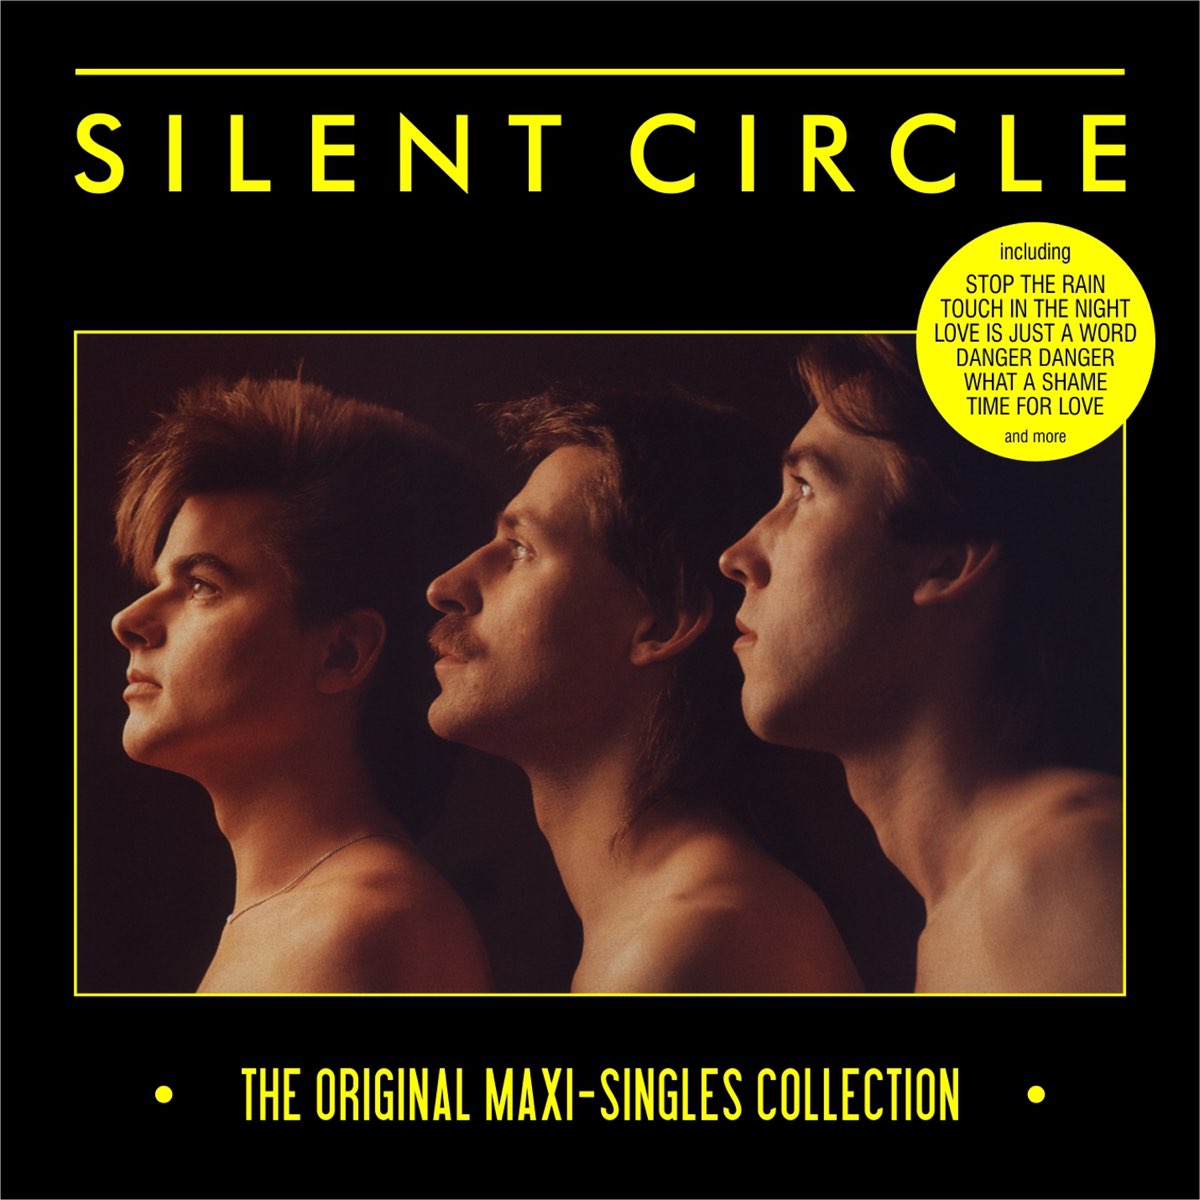 Silent circle. Silent circle Touch in the Night. The Original Maxi-Singles collection. Группа Silent circle. Песня silent circle touch in the night